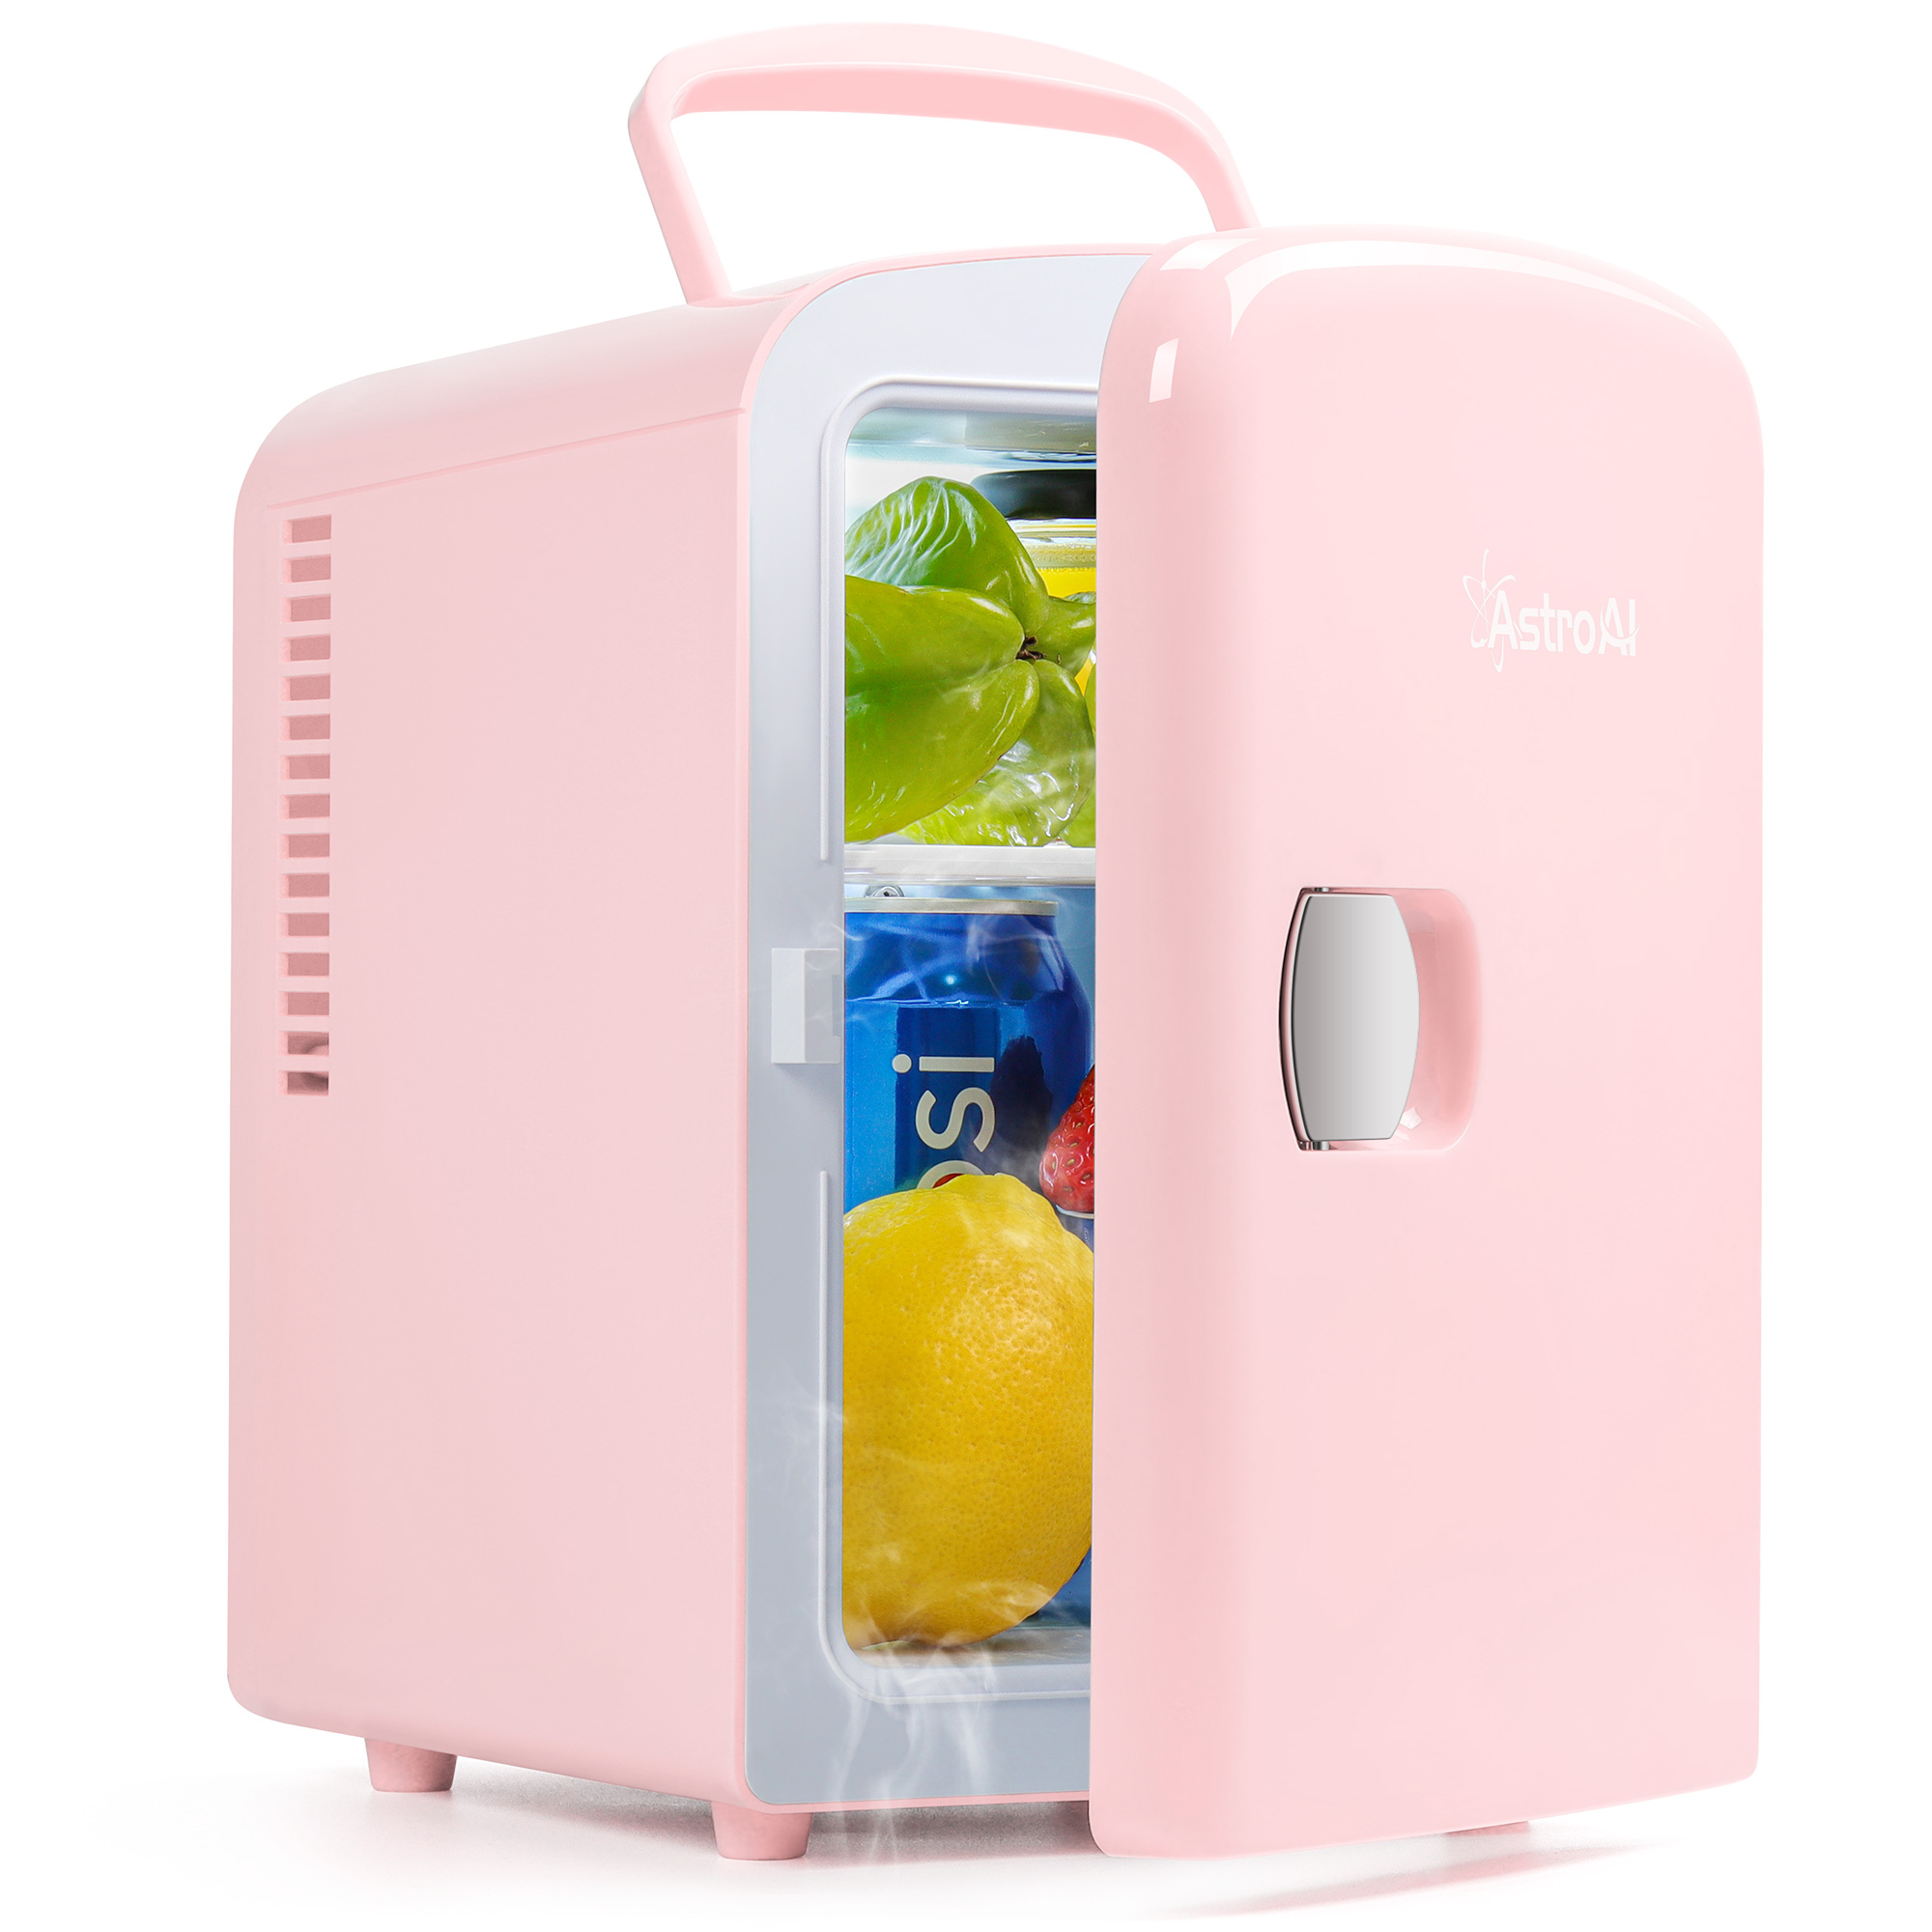 AstroAI Mini Fridge, 4 Liter/6 Can AC/DC Portable Cooler/Warmer Refrigerators Organizer for Skincare, , Beverage, Food, Cosmetics, Home, Office and Car, ETL Listed (Pink) - image 3 of 12